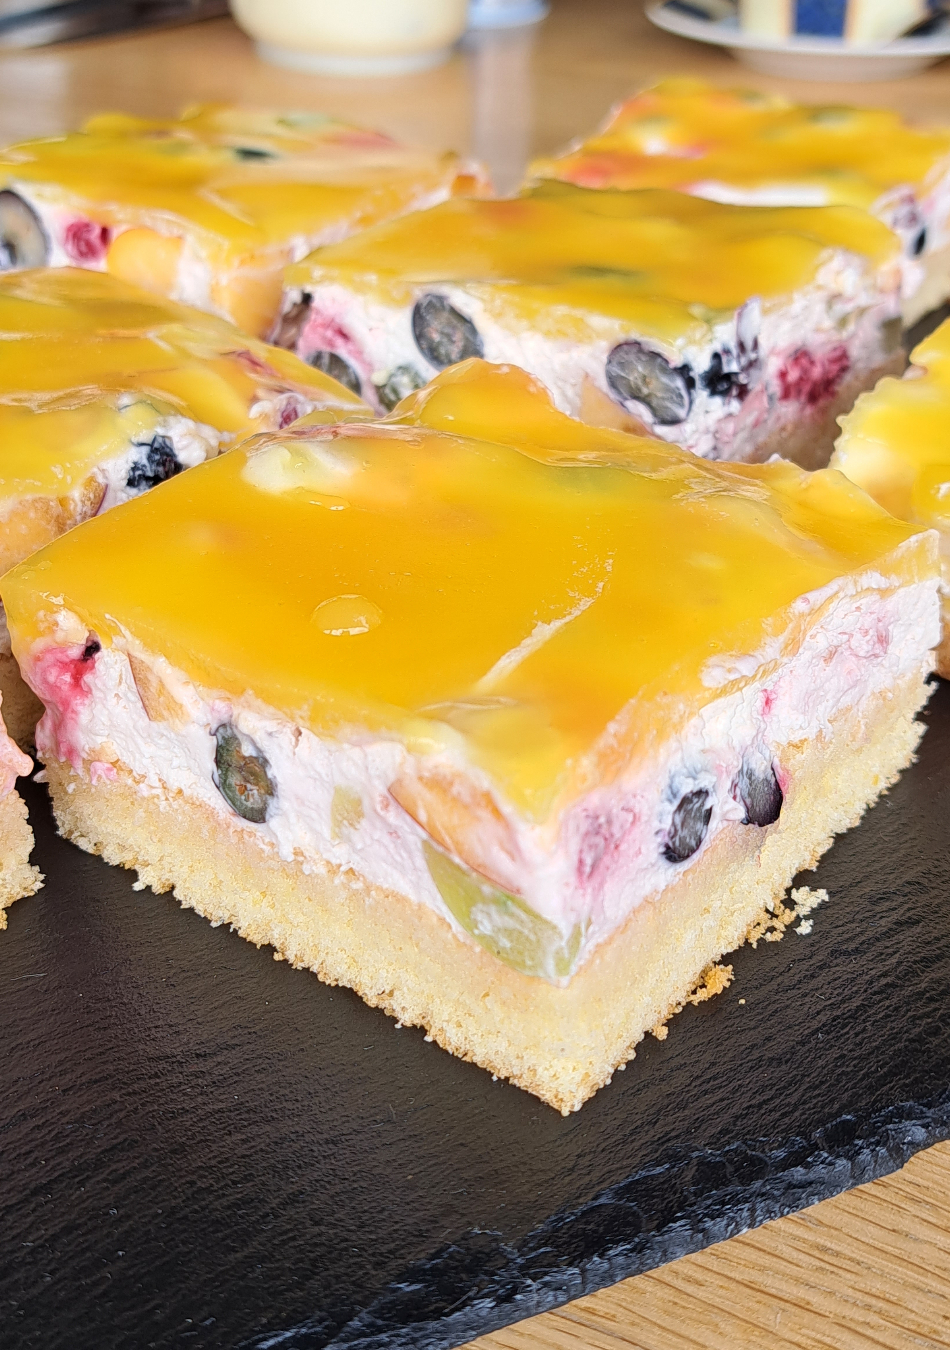 Slice of delicious German fresh cream fruit cake topped with an assortment of vibrant fruits and an orange juice glaze, served on a plate.